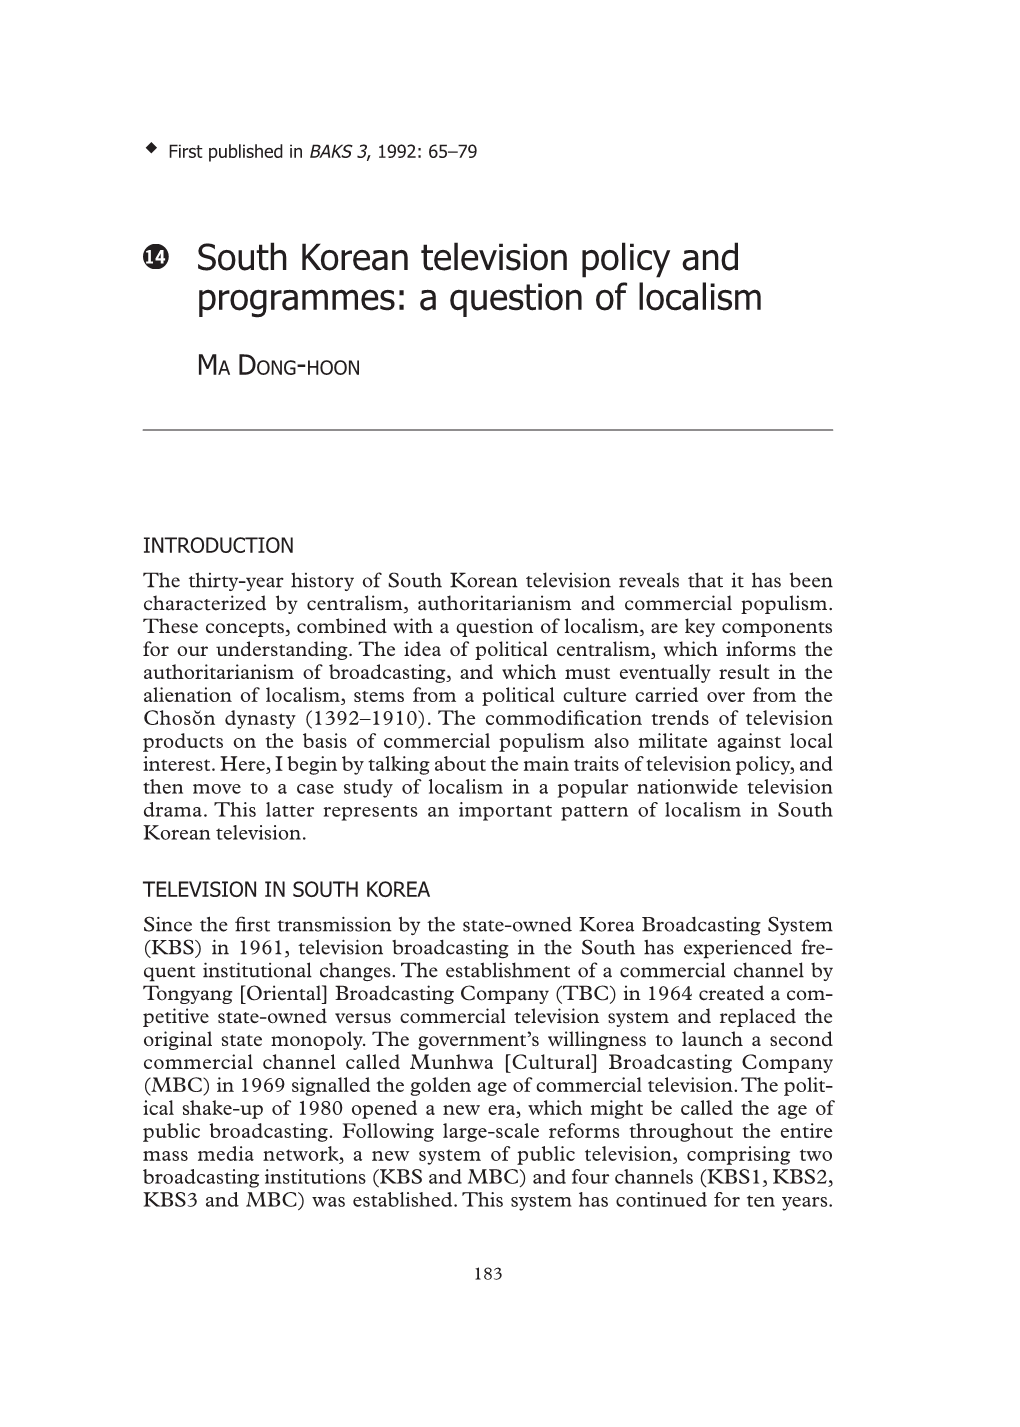 South Korean Television Policy and Programmes: a Question of Localism